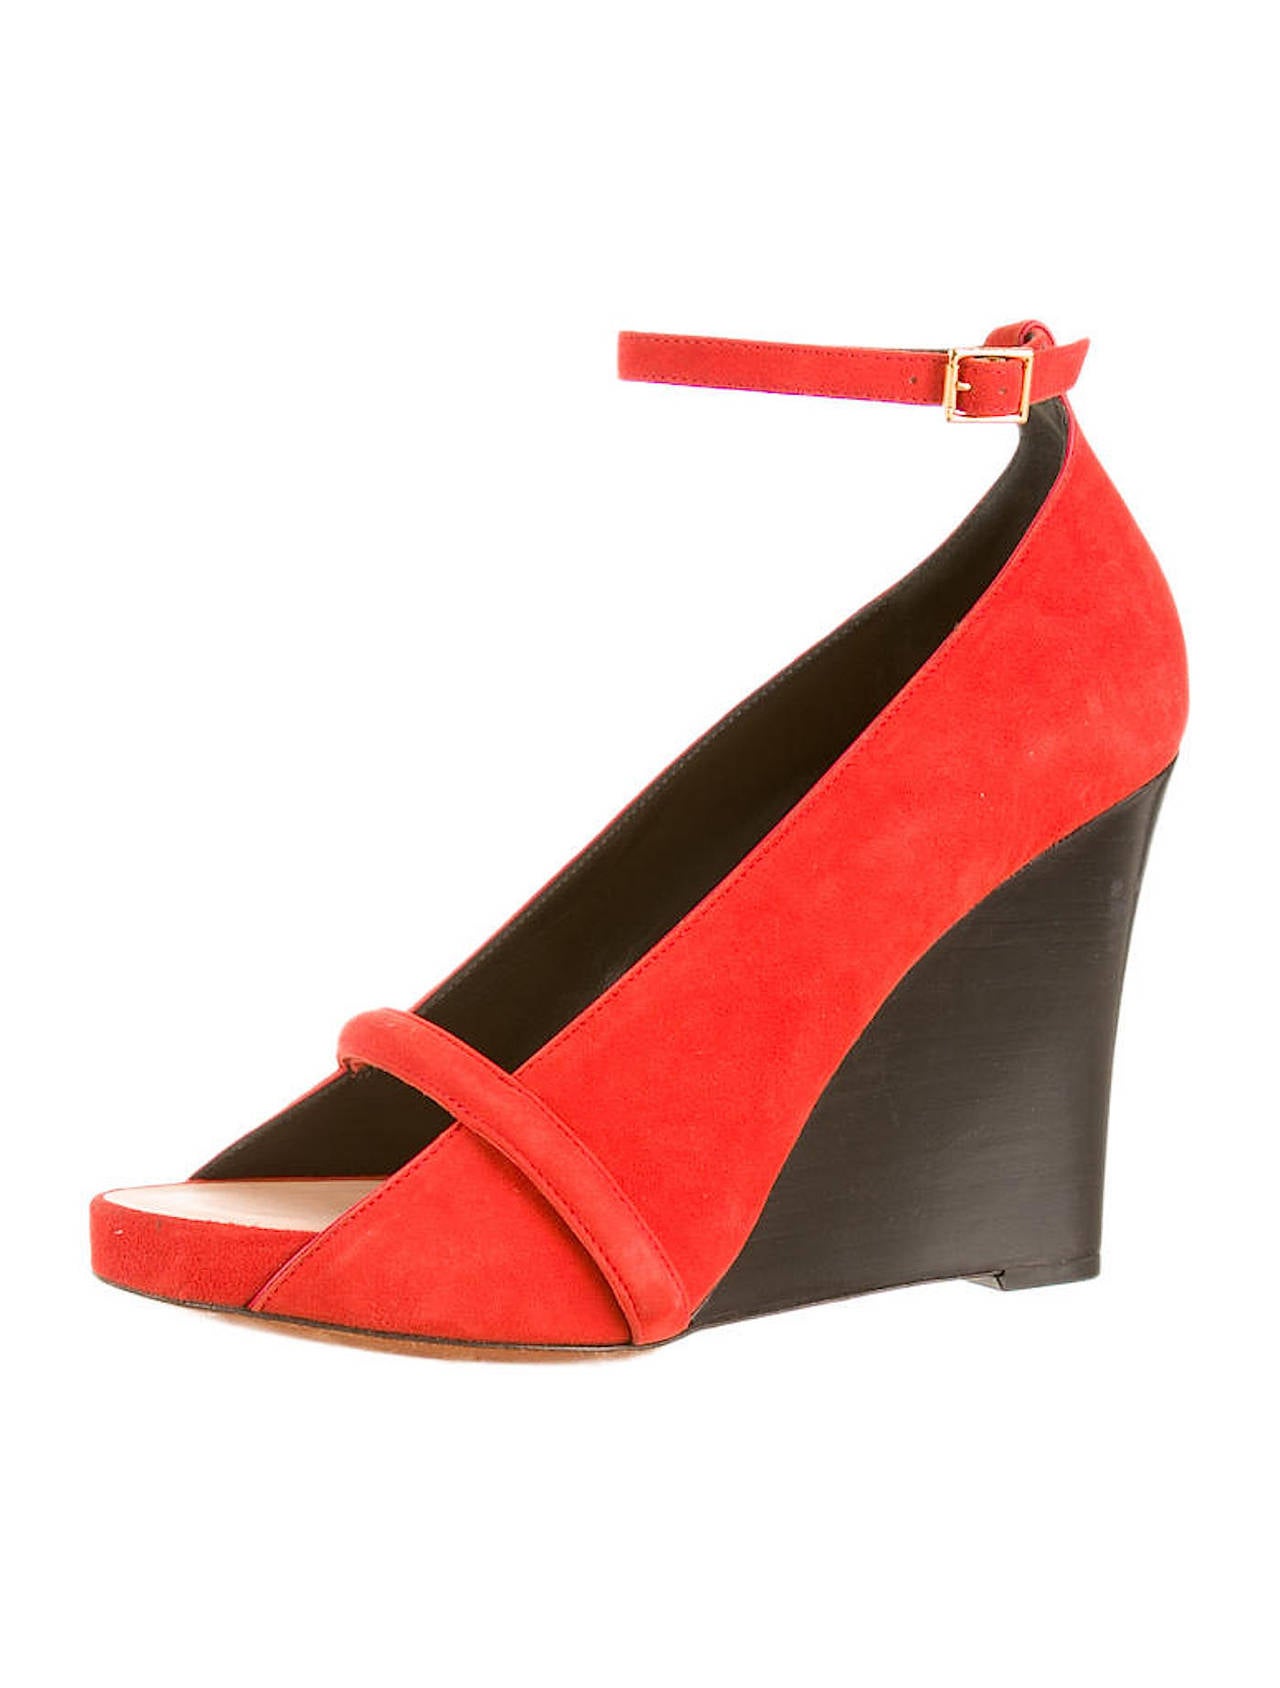 Bright tangerine suede Celine wedges with wooden 4.25